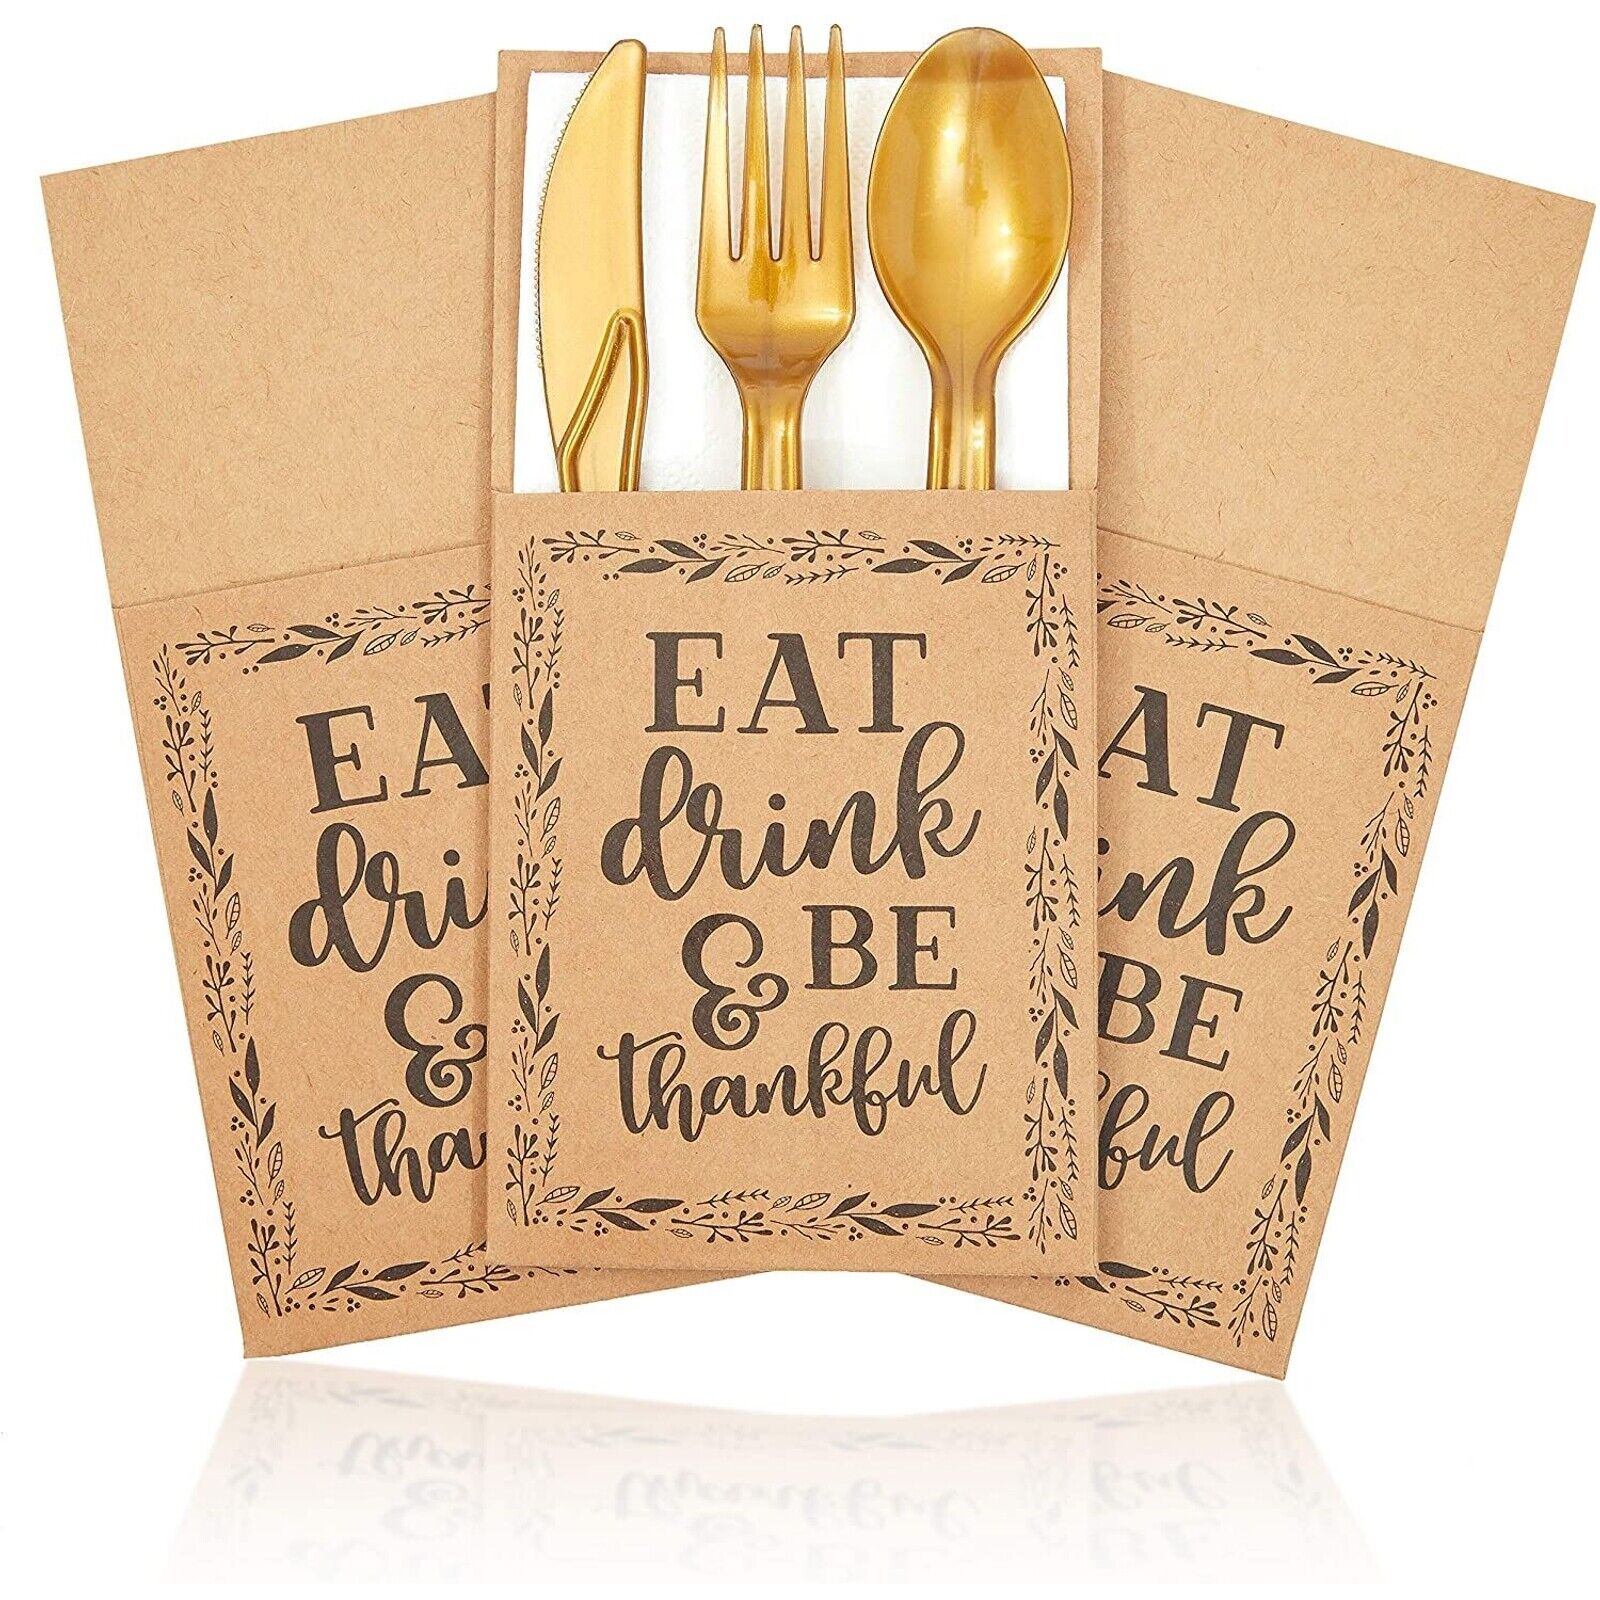 36x Eat Drink & Be Thankful Paper Utensil Holder Pocket for Thanksgiving Party